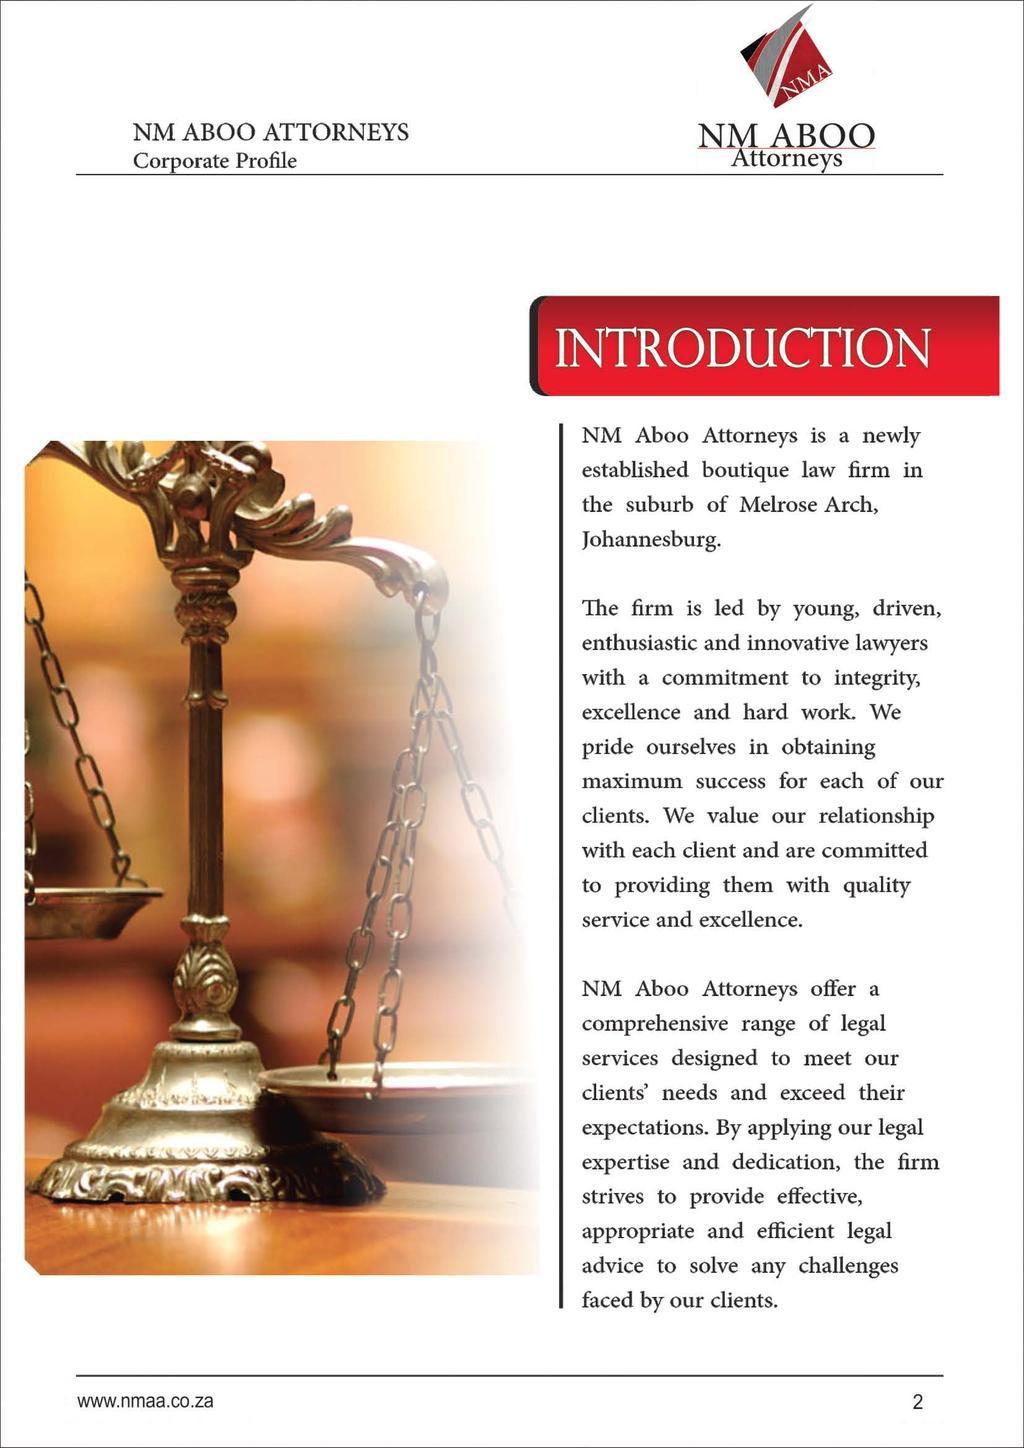 INTRODUCTION NM Aboo is a newly established boutique law firm in the suburb of Melrose Arch, Johannesburg.